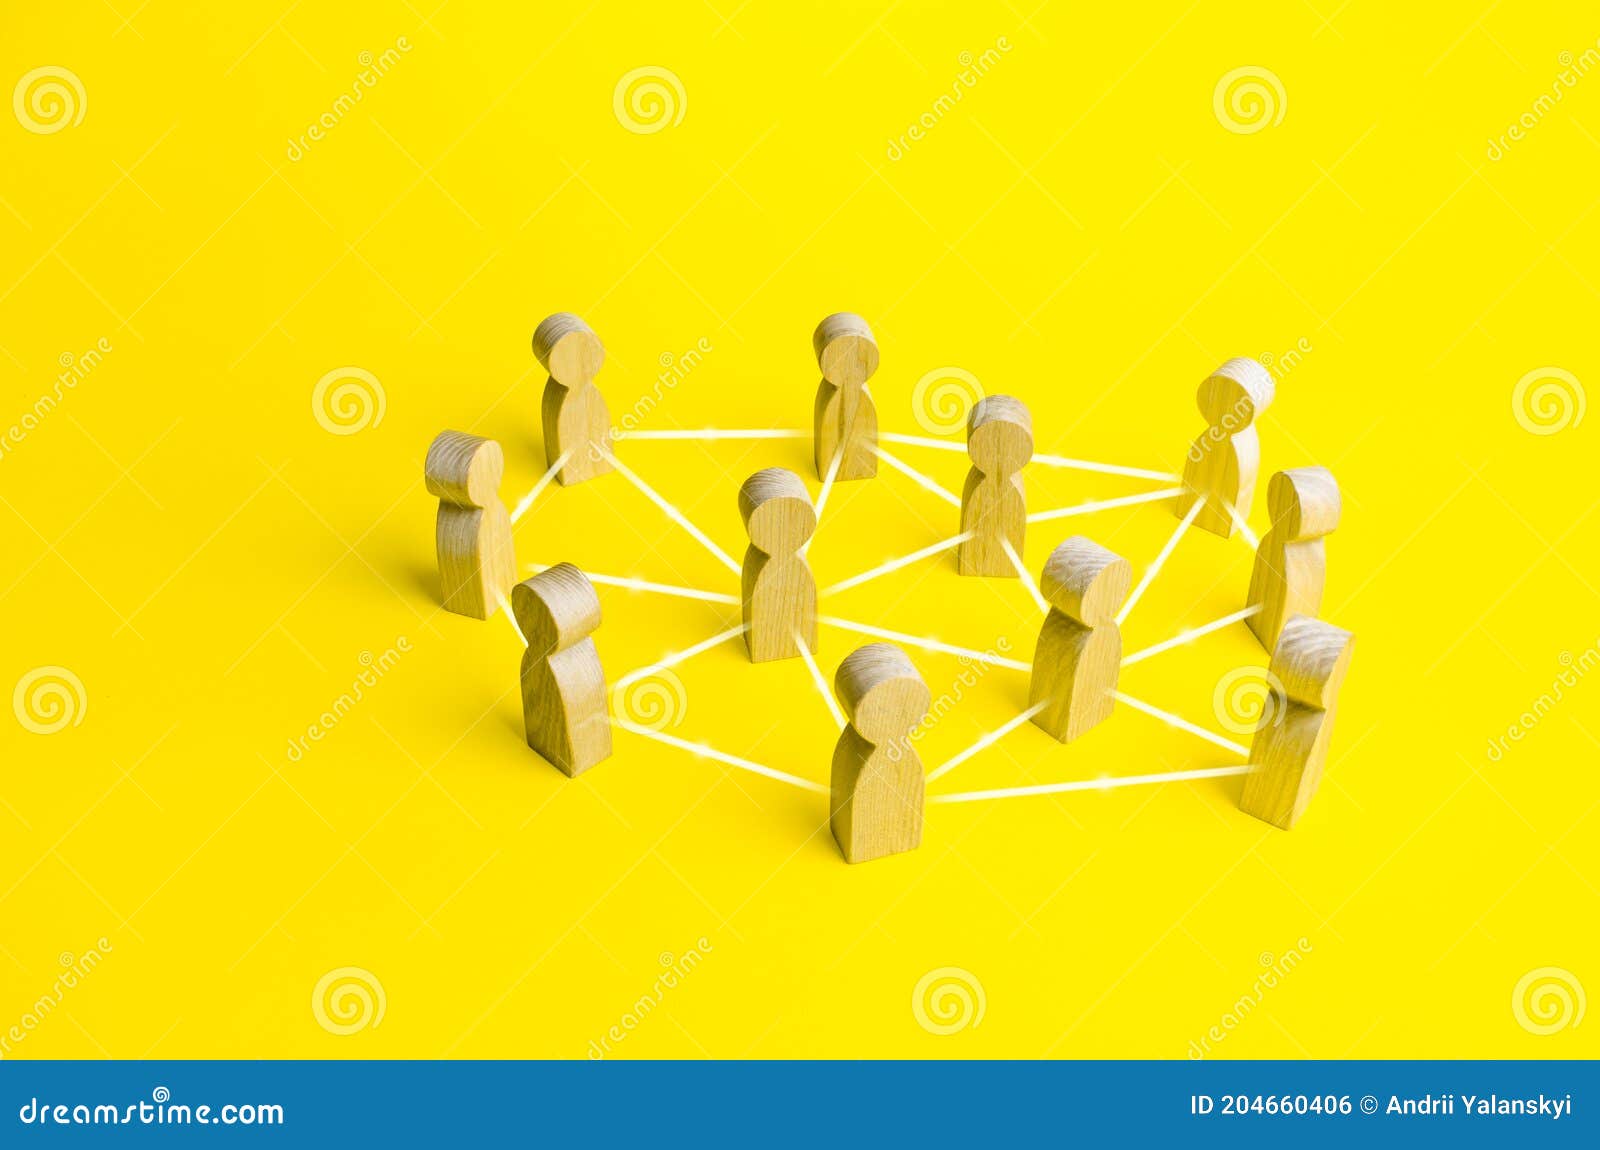 people connected by lines on a yellow background. self-organized hierarchical business company system. distribution